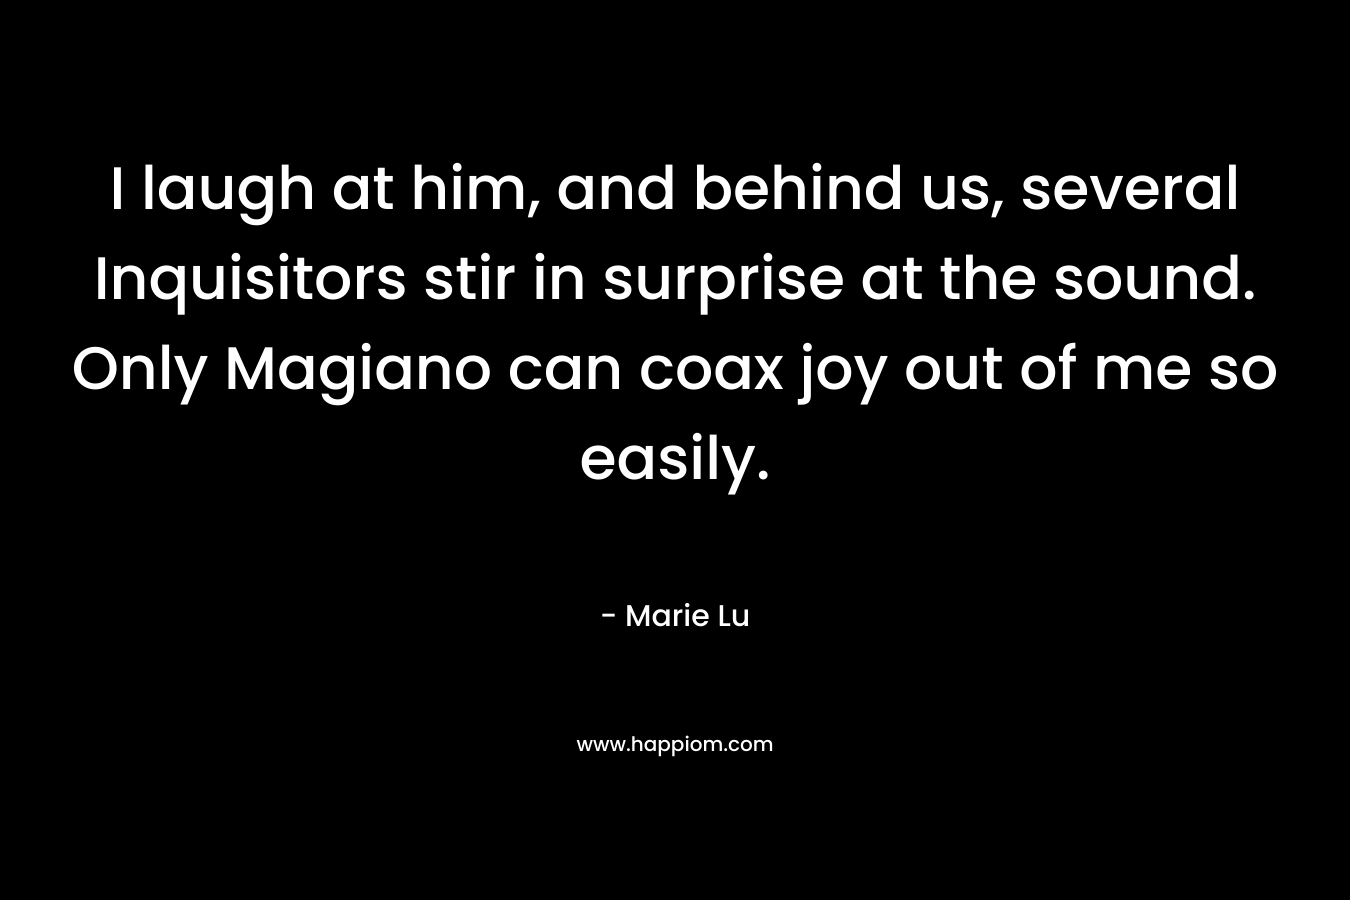 I laugh at him, and behind us, several Inquisitors stir in surprise at the sound. Only Magiano can coax joy out of me so easily. – Marie Lu